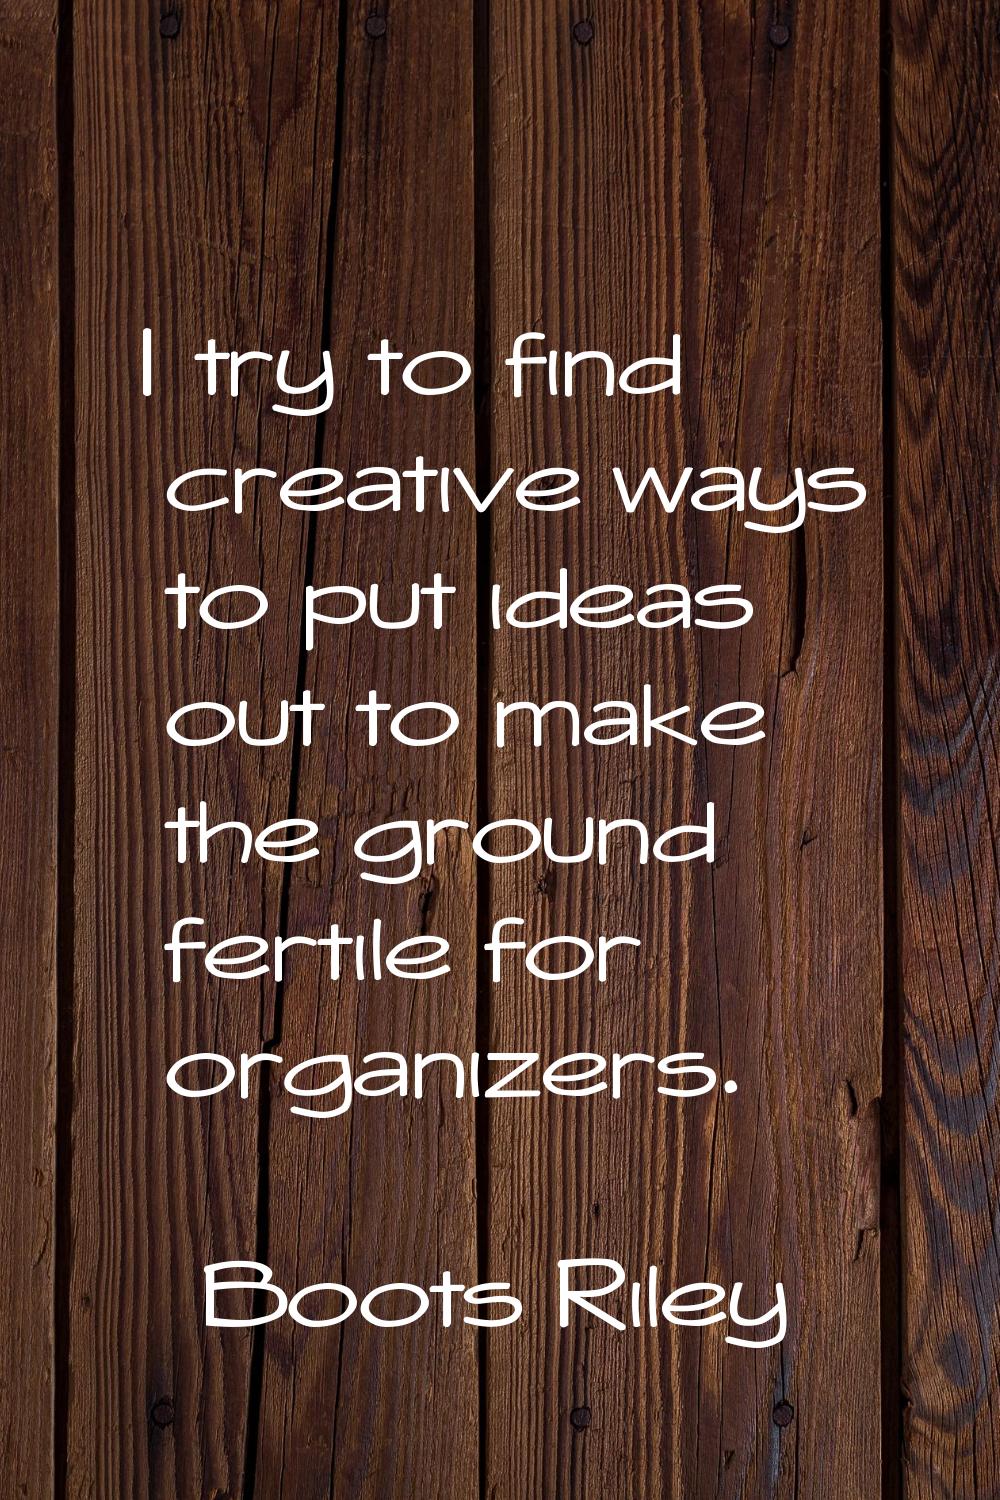 I try to find creative ways to put ideas out to make the ground fertile for organizers.